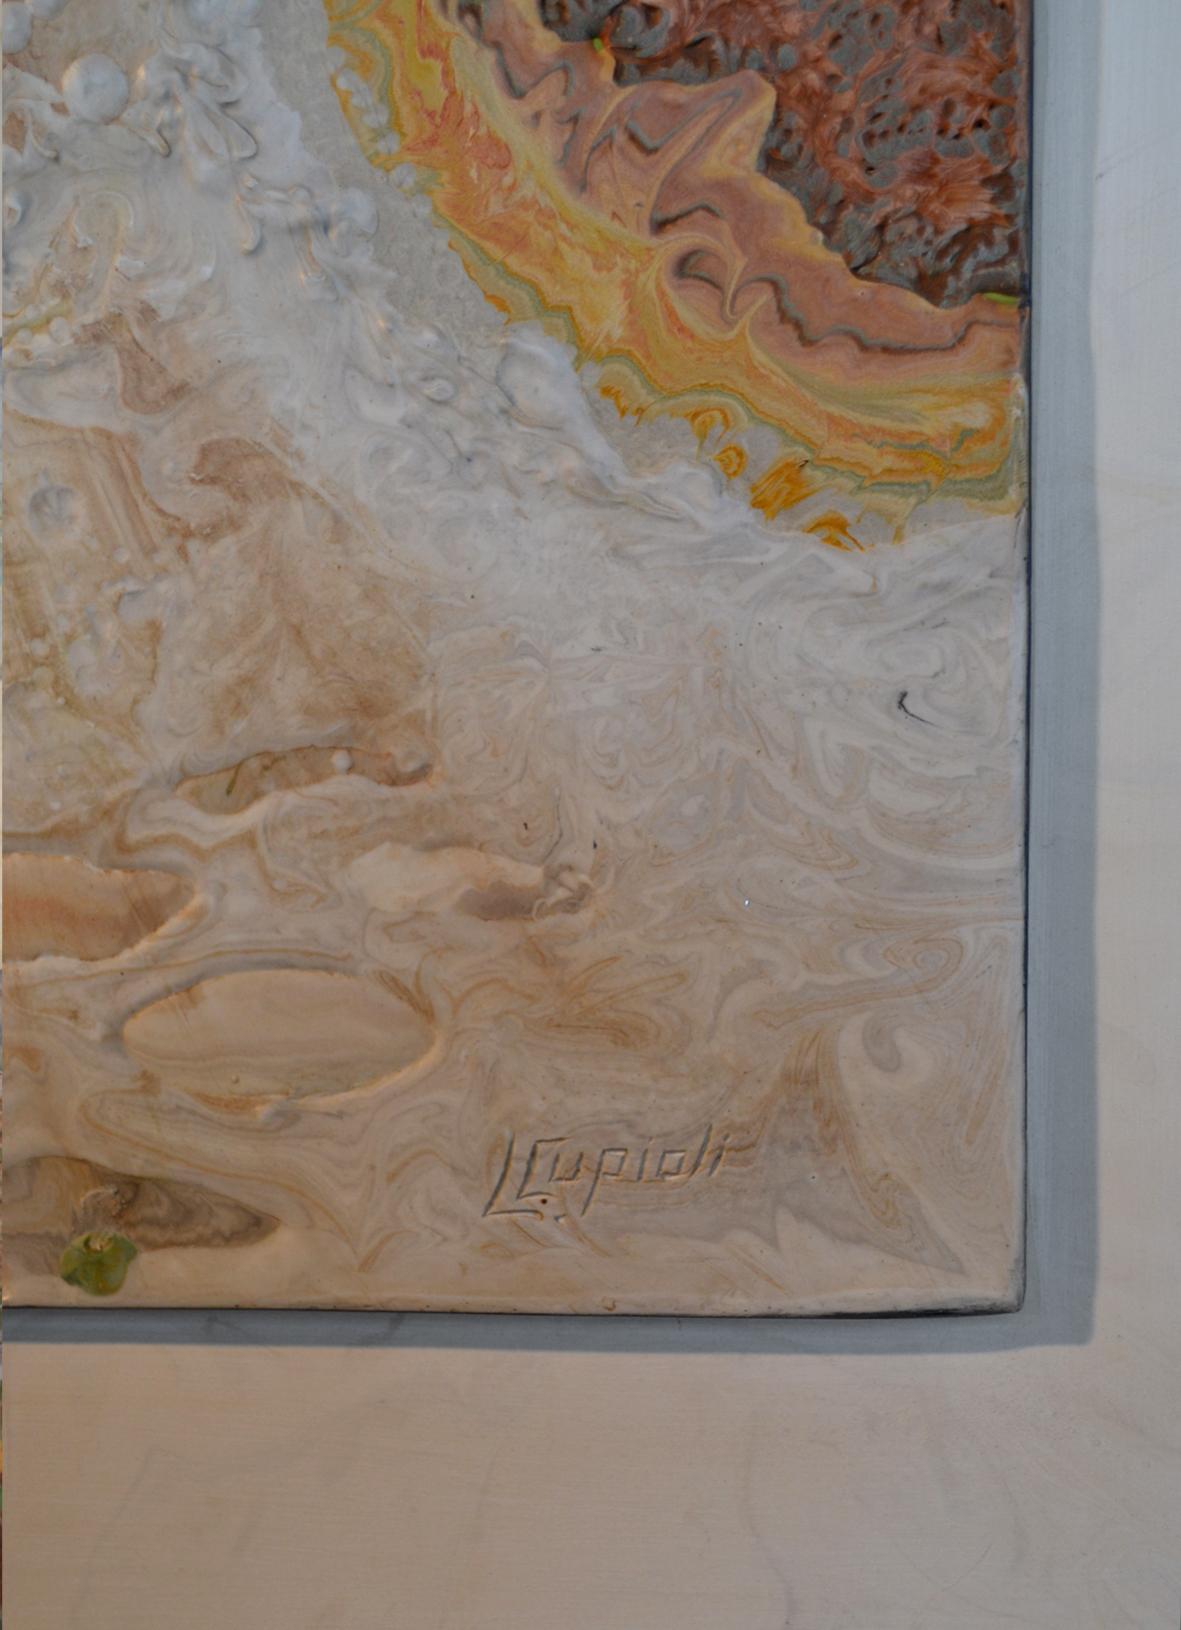 Hand-Crafted Textured artistic scagliola relief painting handmade in Italy by Cupioli For Sale